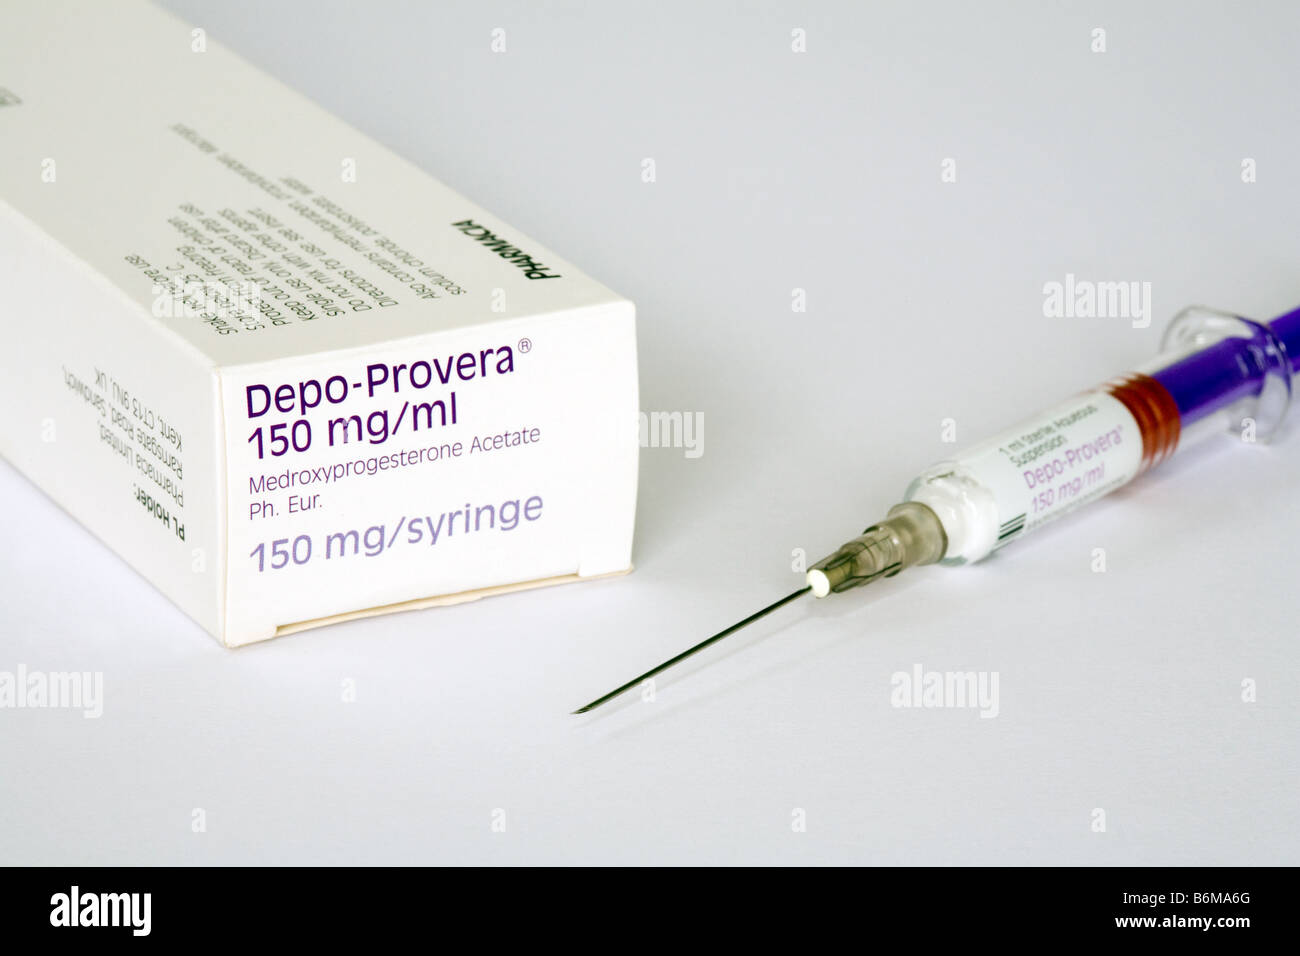 Contraceptif injectable Depo-Provera Banque D'Images